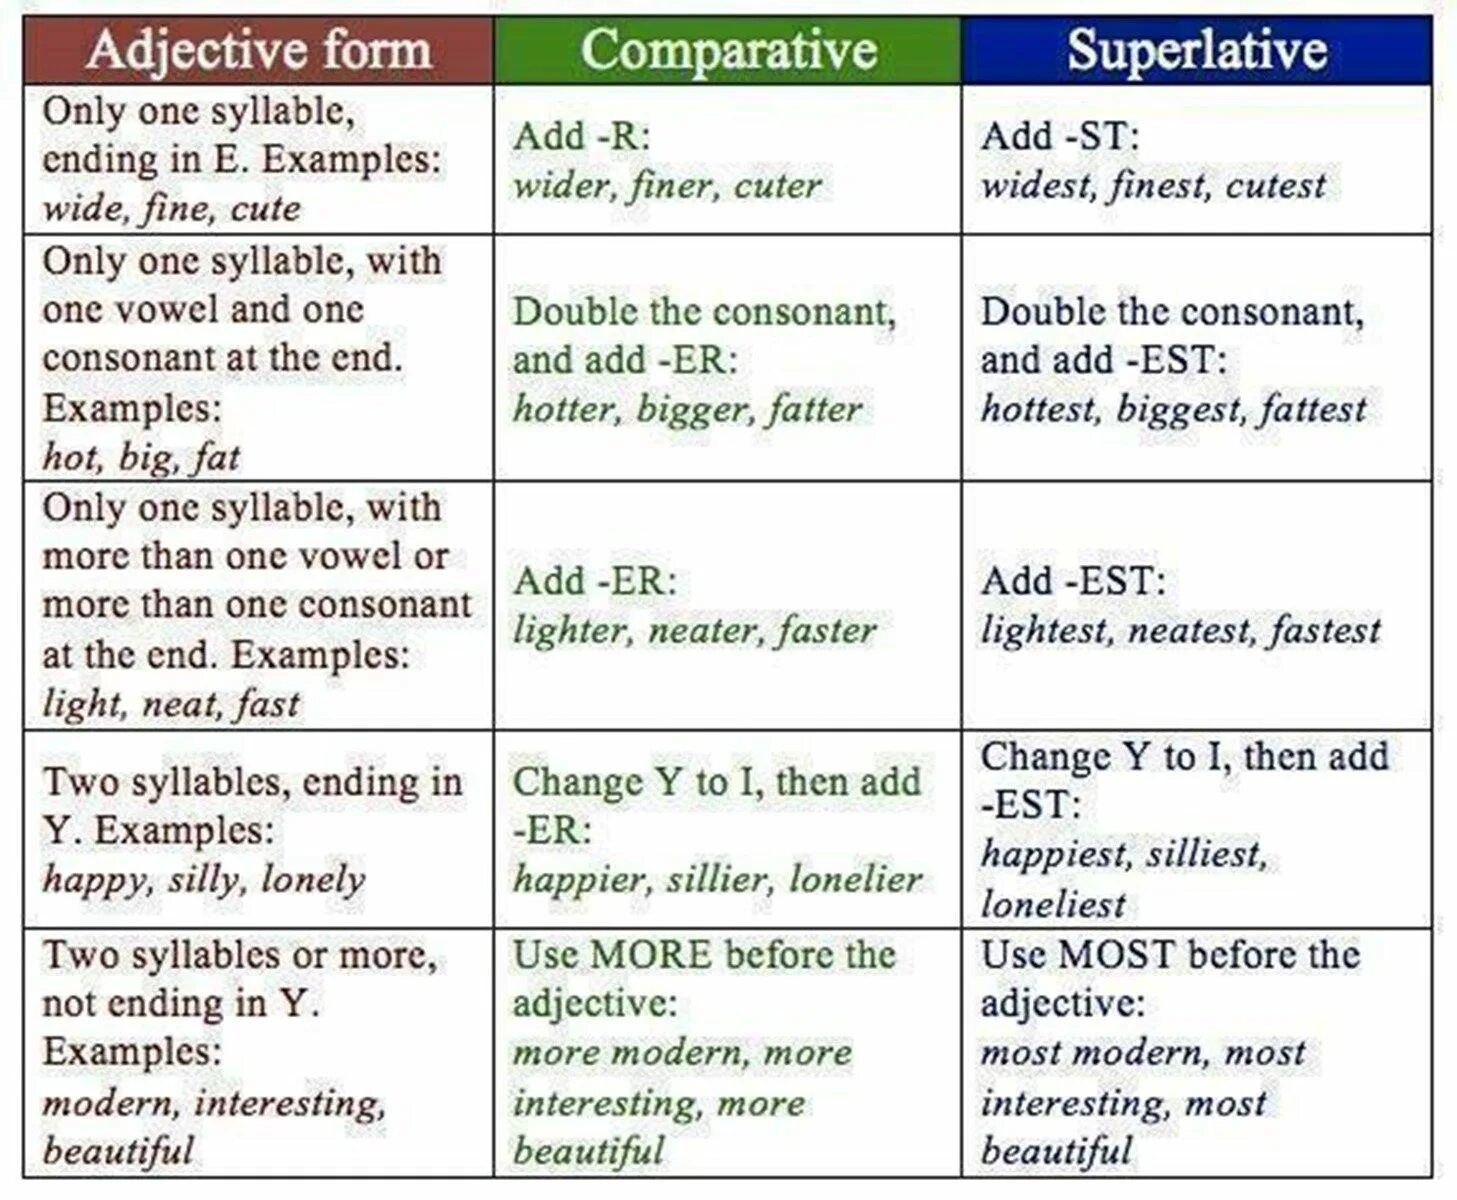 Comparatives and Superlatives правило таблица. Adjective Comparative Superlative таблица. Английский Comparative and Superlative. Таблица Comparative and Superlative. Adjective предложения